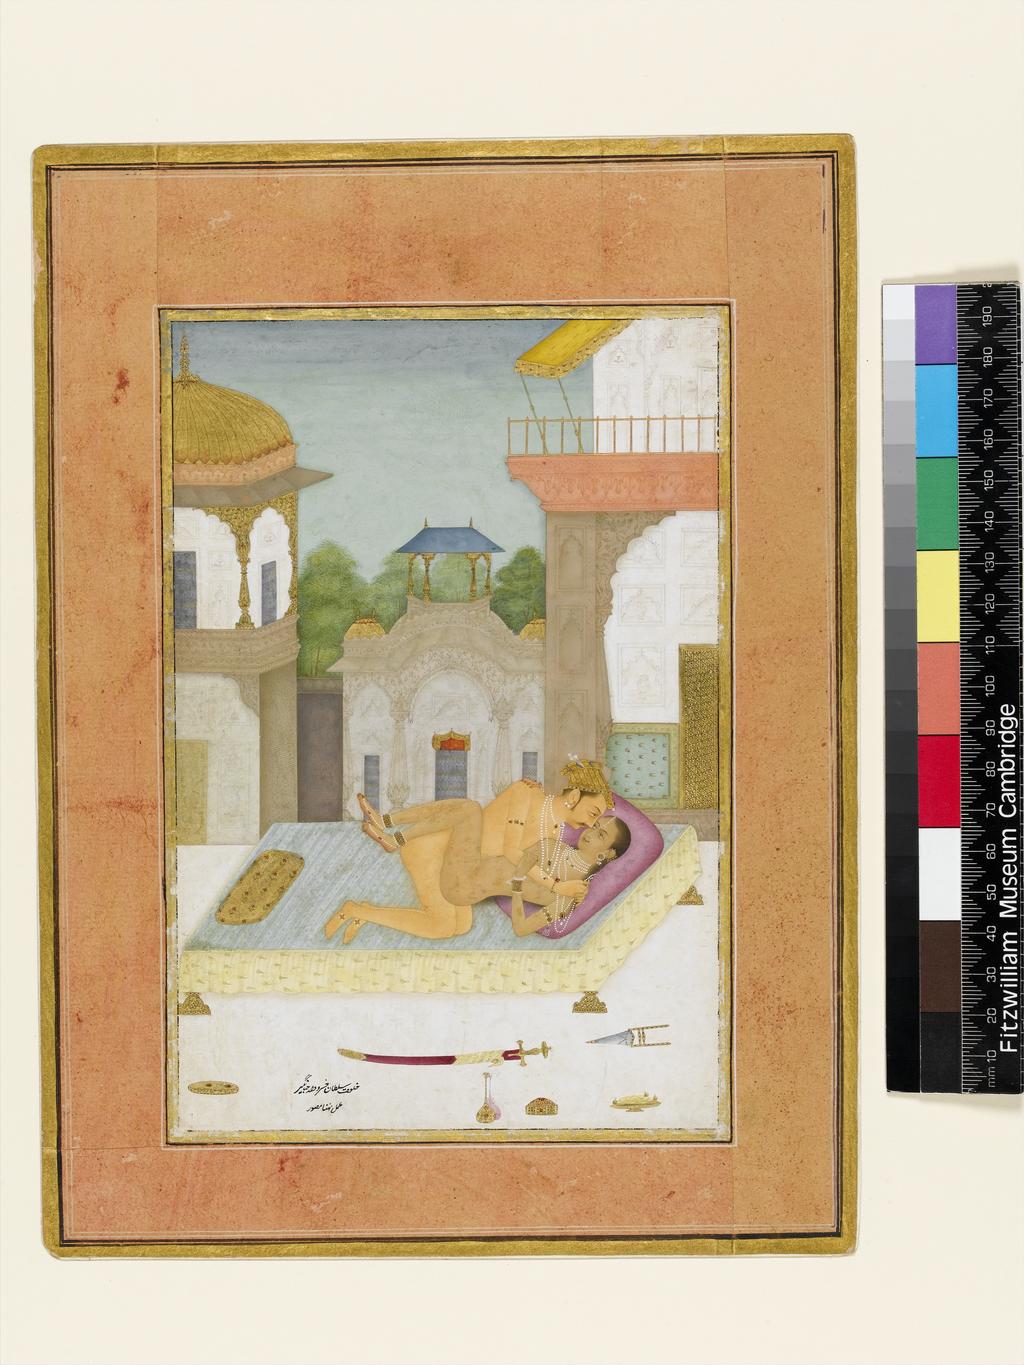 An image of The private pleasure of Prince Khusrau, son of Jahangir by Natha. Bodycolour including white, pen and ink with gold on paper, height 199mm, width 132mm, circa 1678.